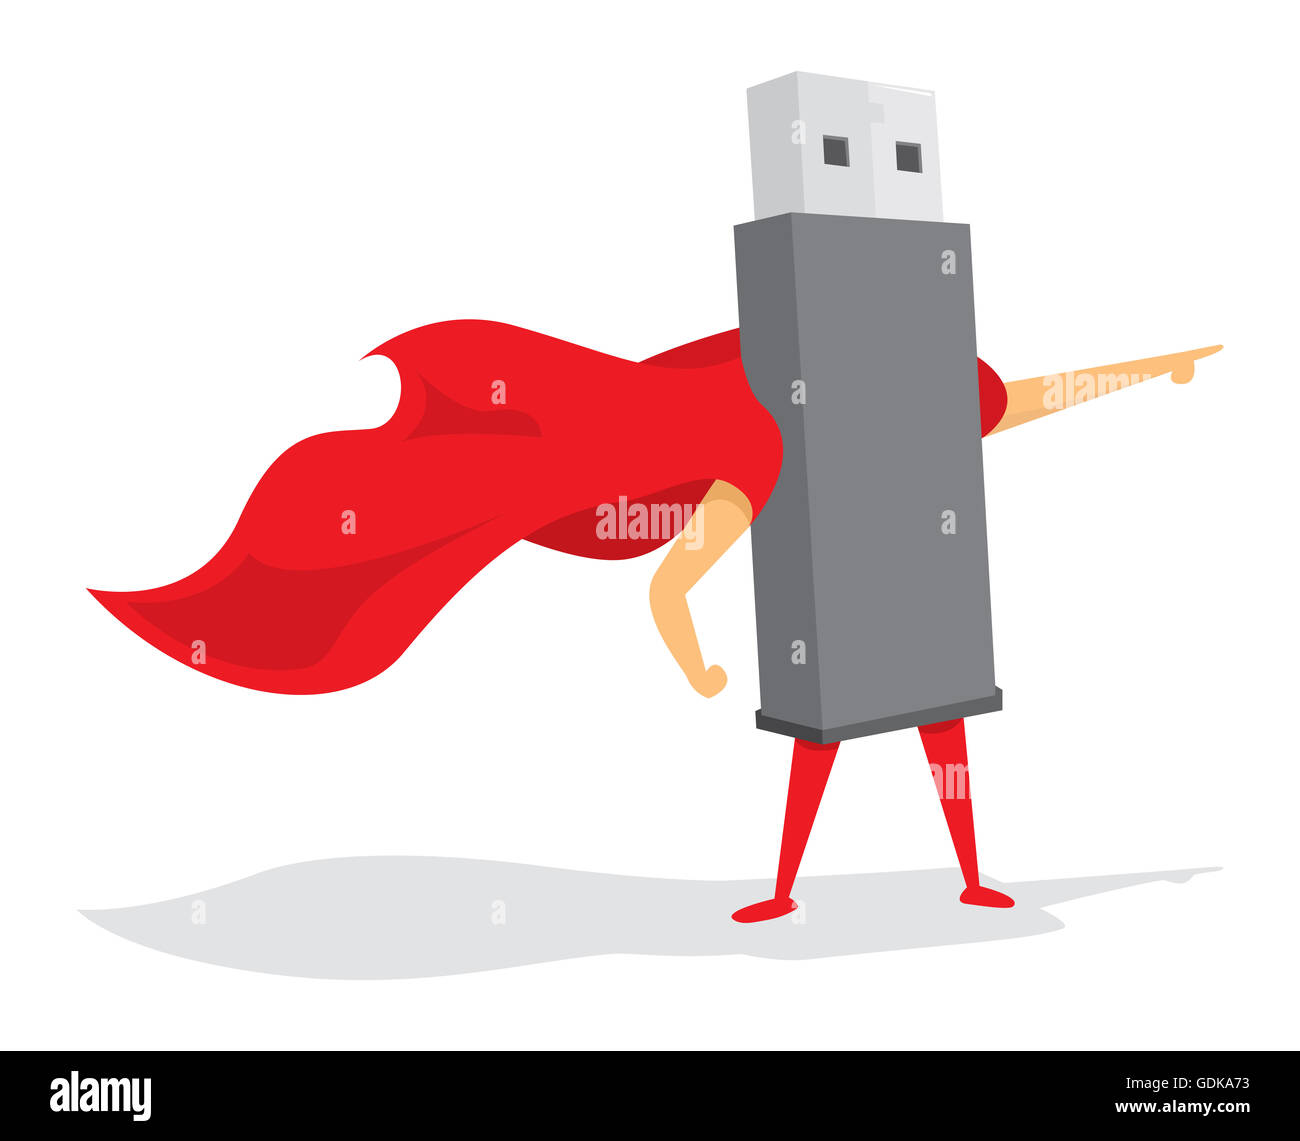 Cartoon illustration of flash drive standing with cape Stock Photo